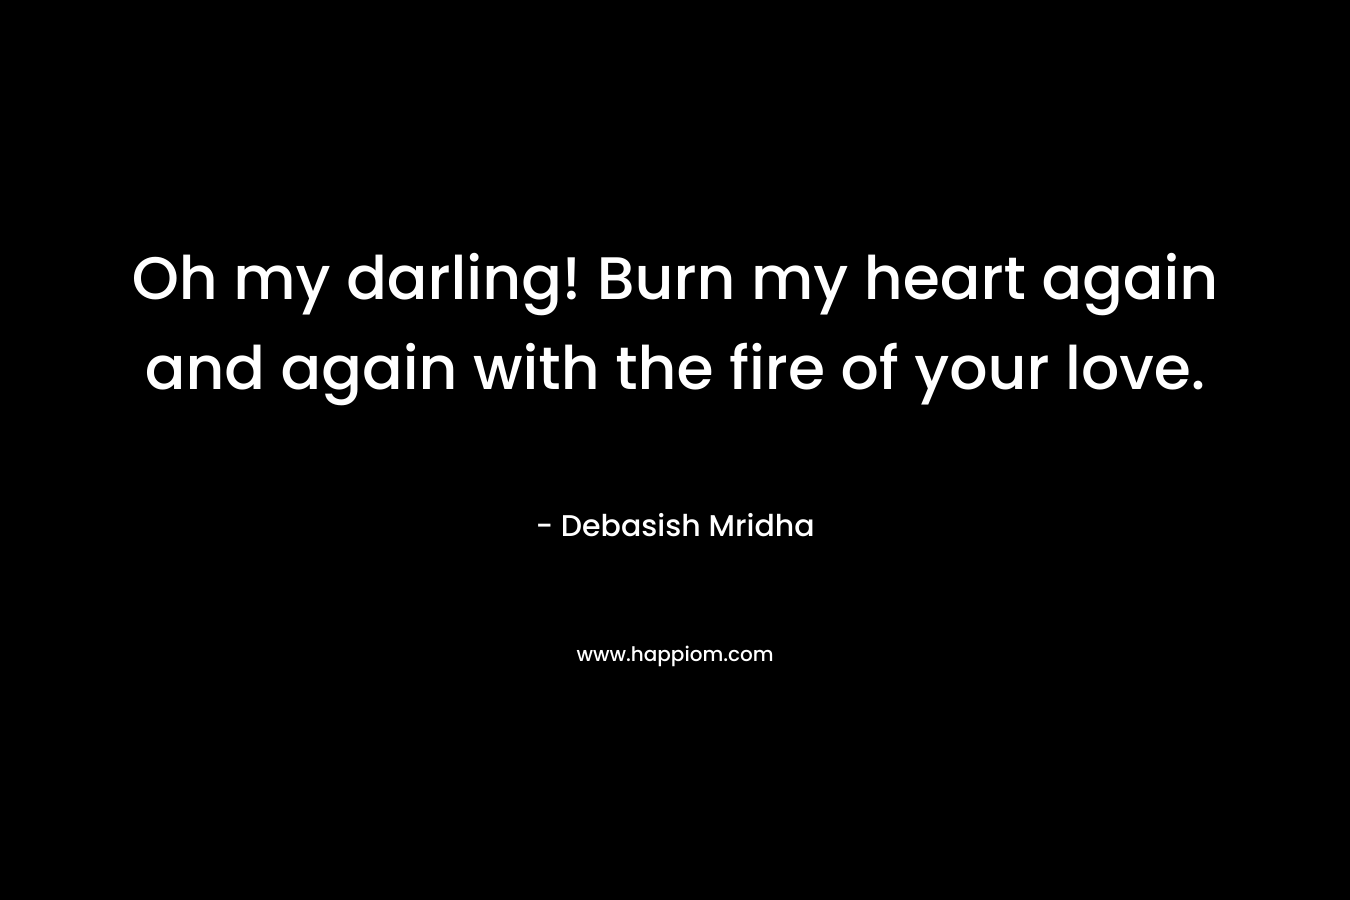 Oh my darling! Burn my heart again and again with the fire of your love.